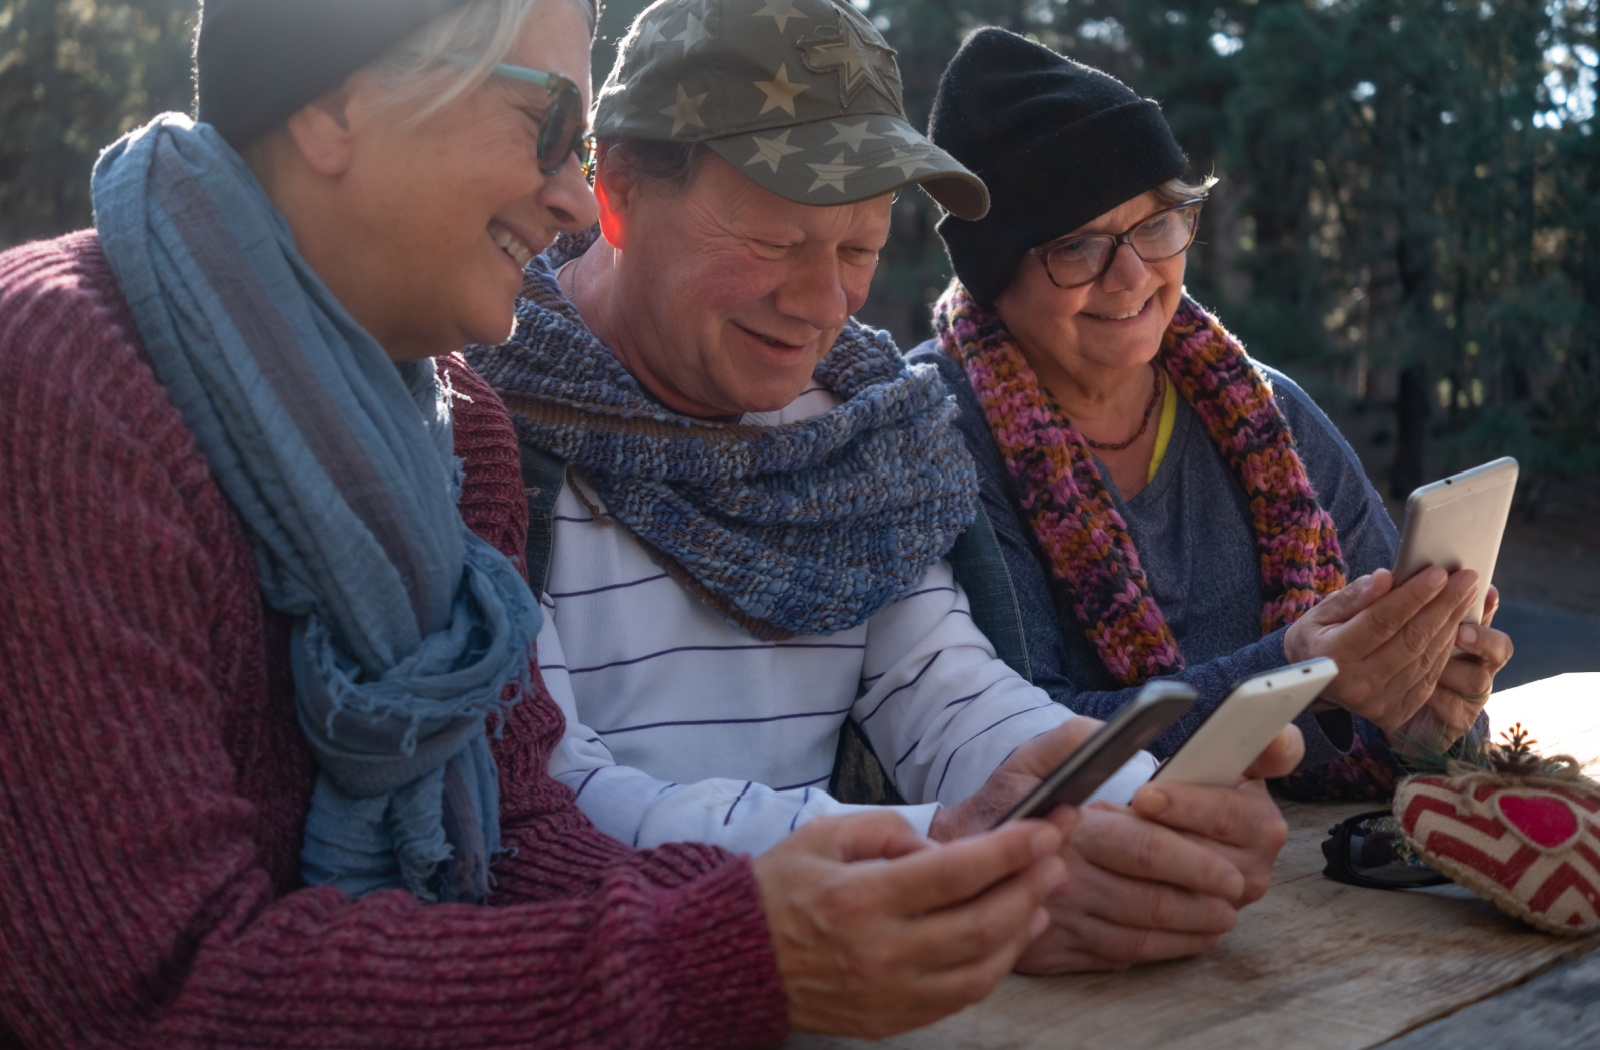 3 seniors sitting outdoors and wearing winter clothing while they use smartphones